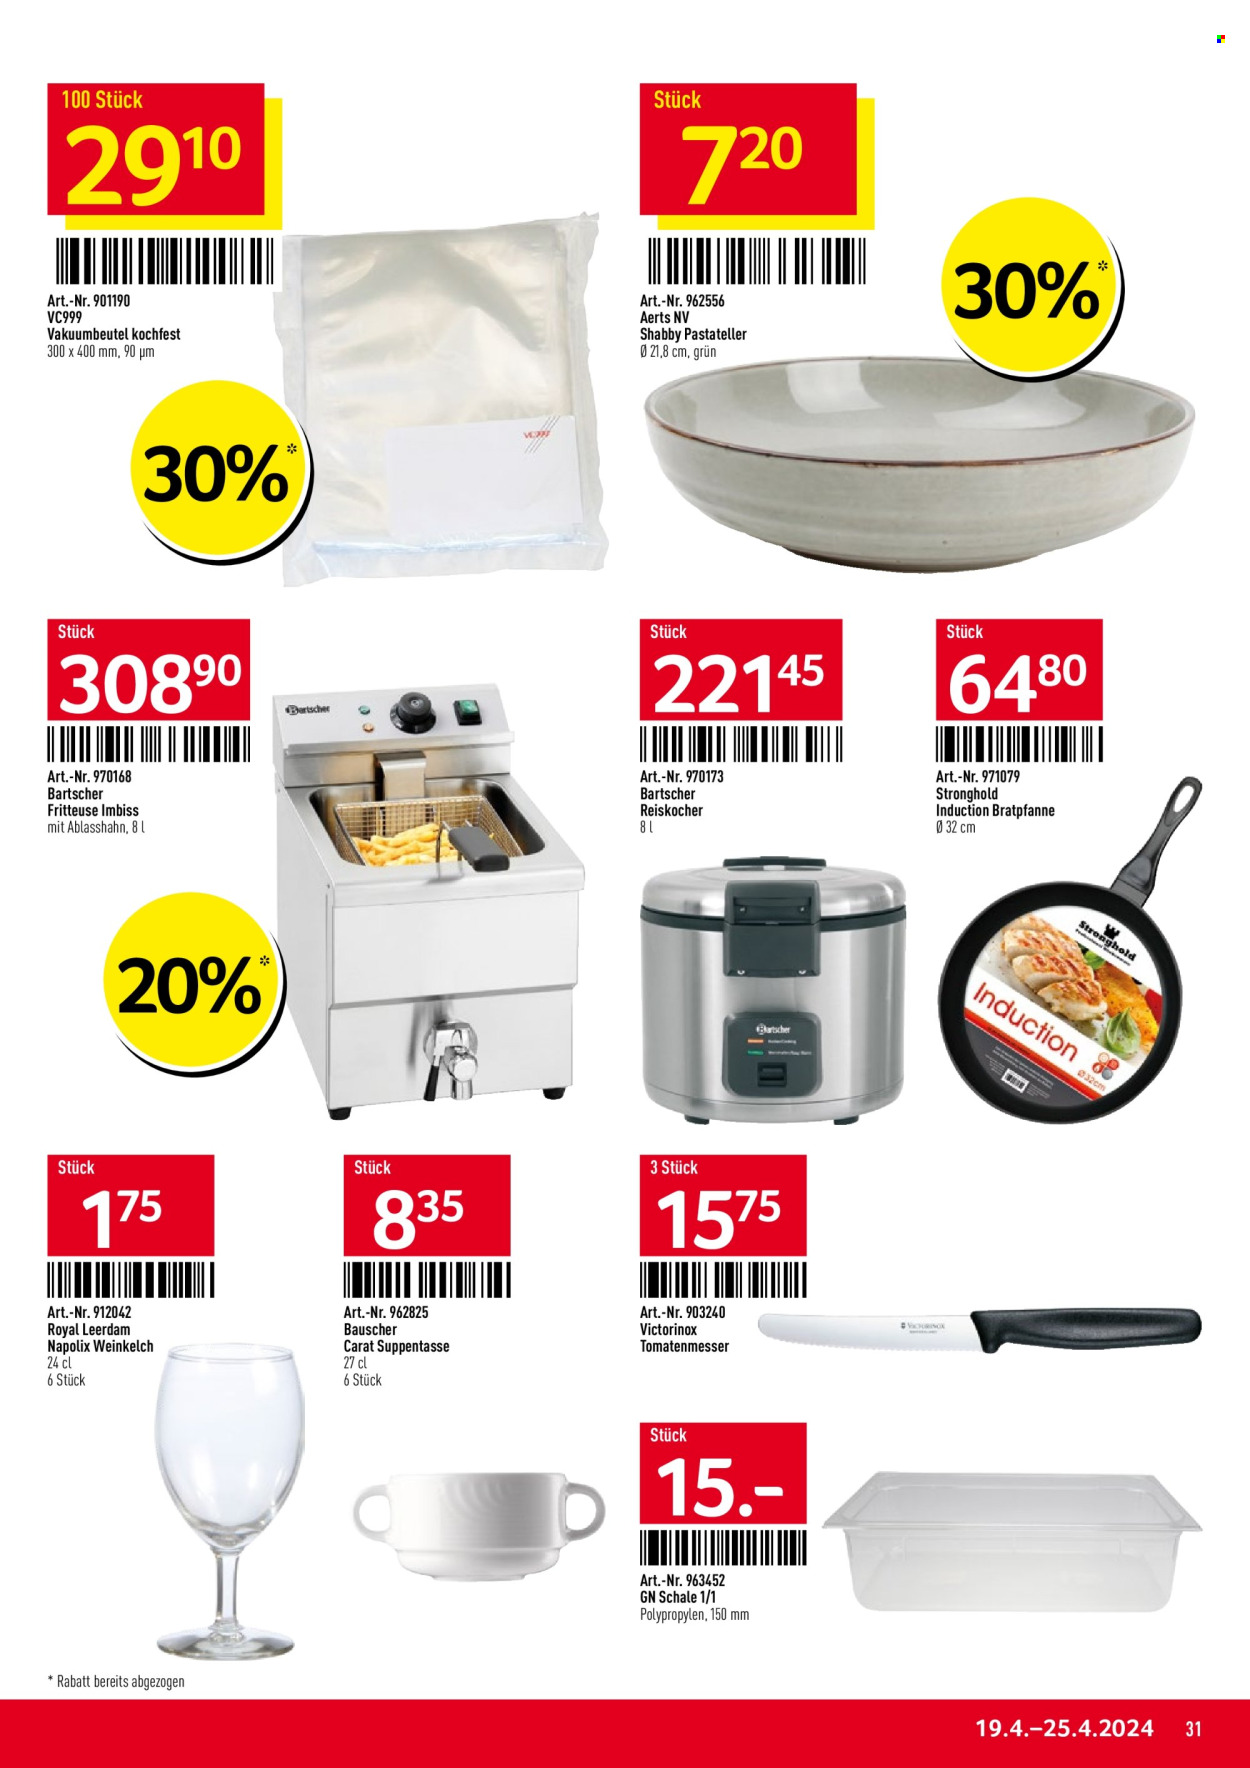 Catalogue TransGourmet - 19.4.2024 - 25.4.2024. Page 31.